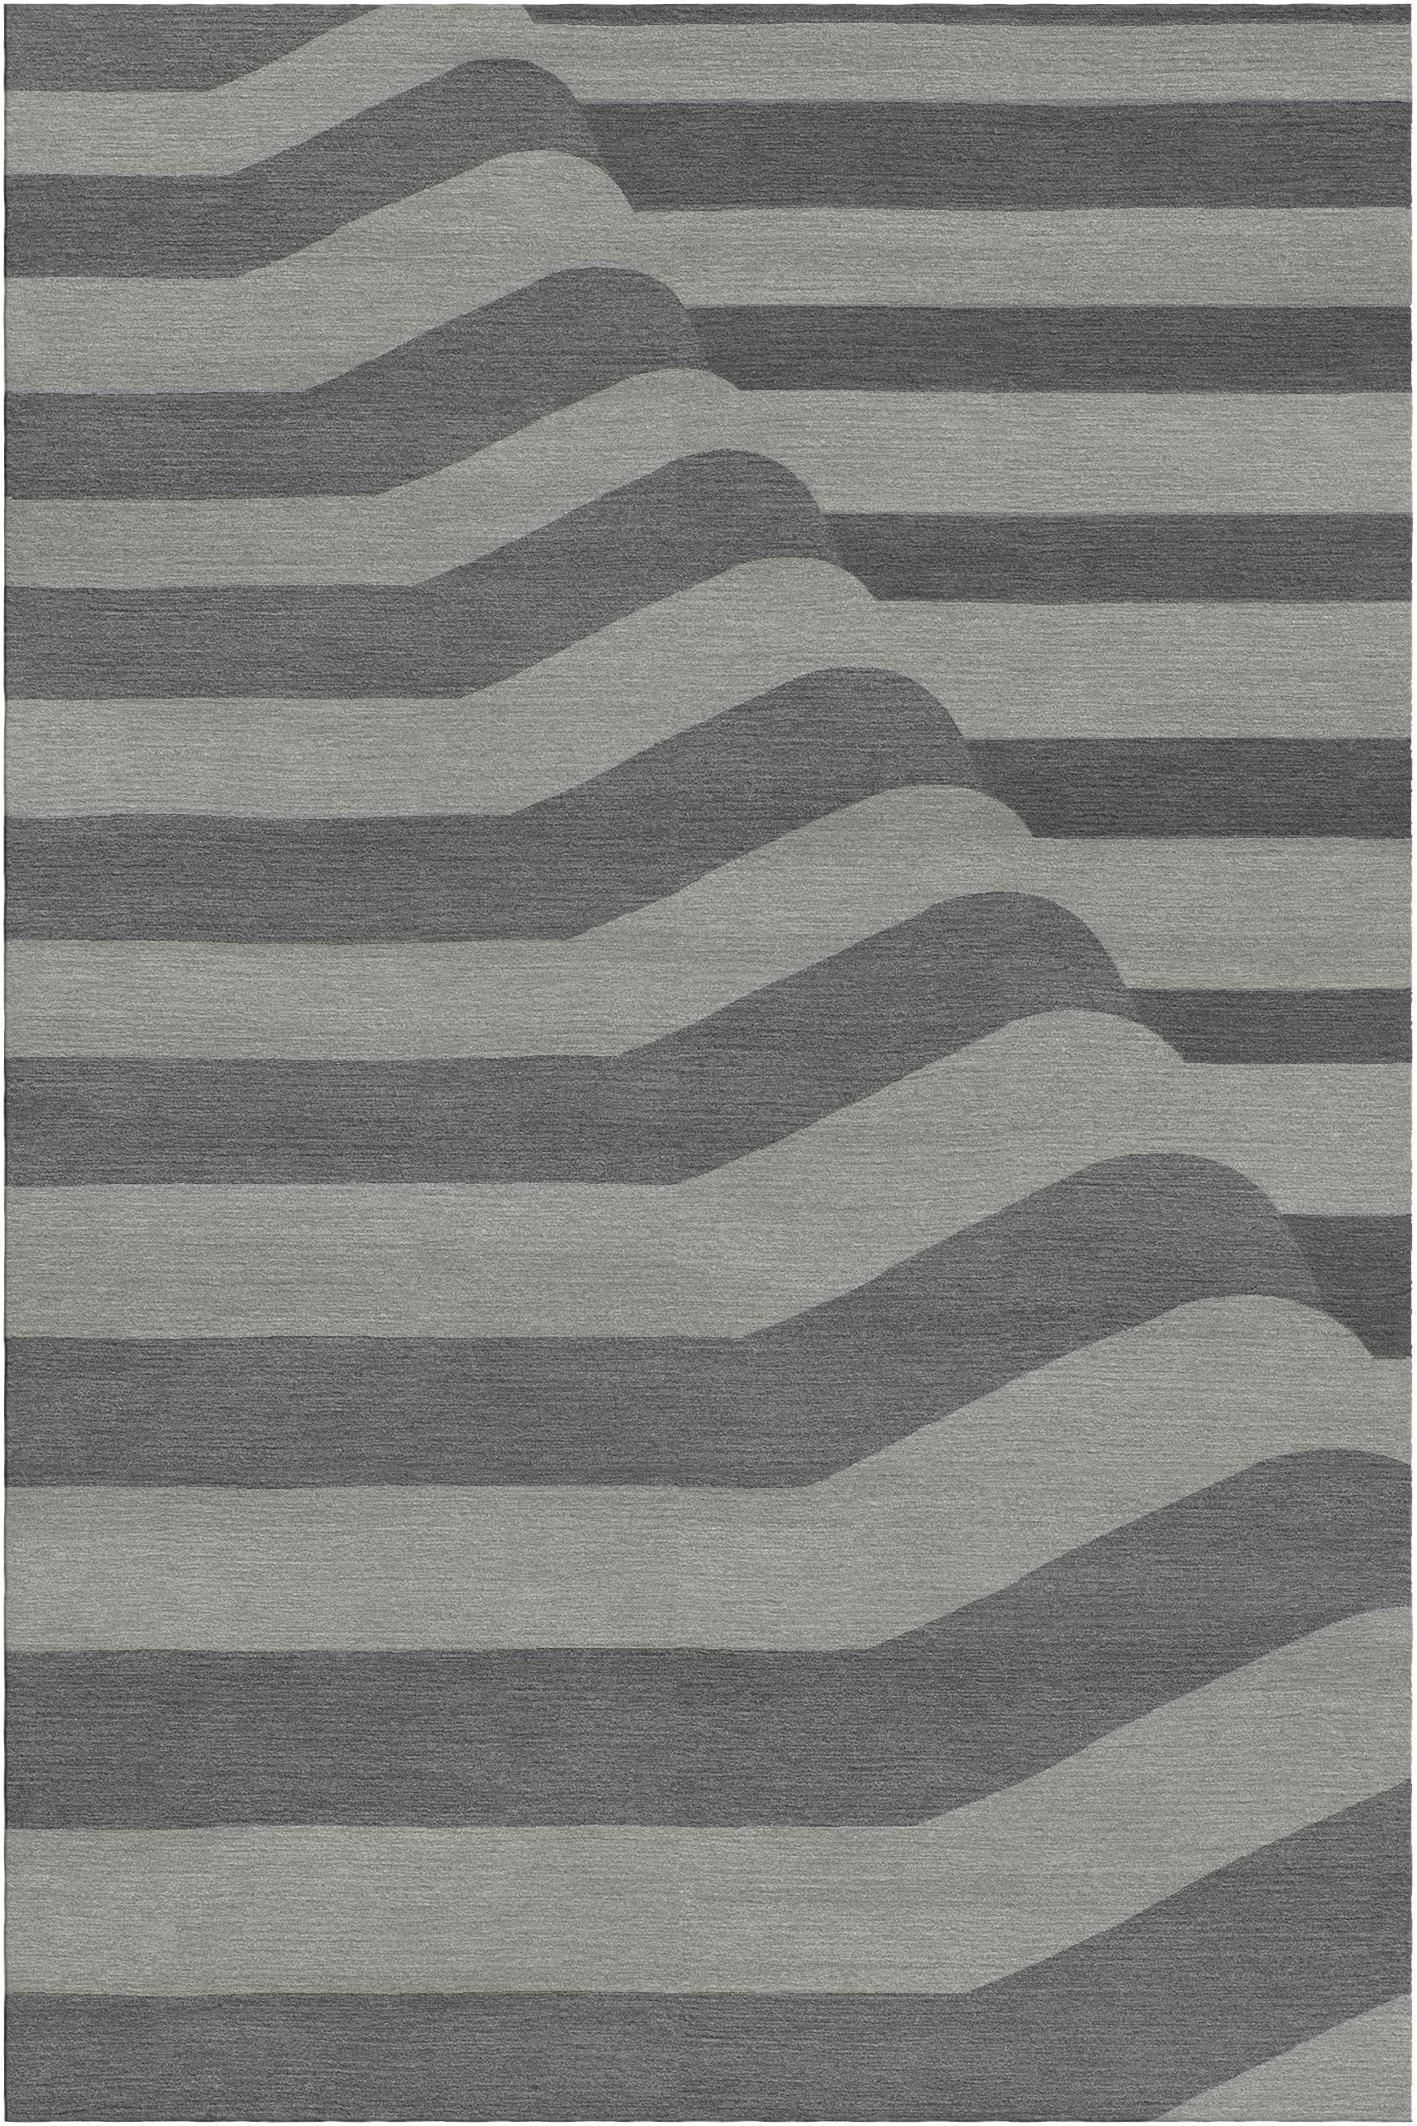 Pieghe rug II by Giulio Brambilla
Dimensions: D 300 x W 200 x H 1.5 cm
Materials: NZ wool, bamboo silk
Available in other colors.

Boasting an abstract design distinguished by a two-dimensional series of creases (“piega” in Italian), this rug